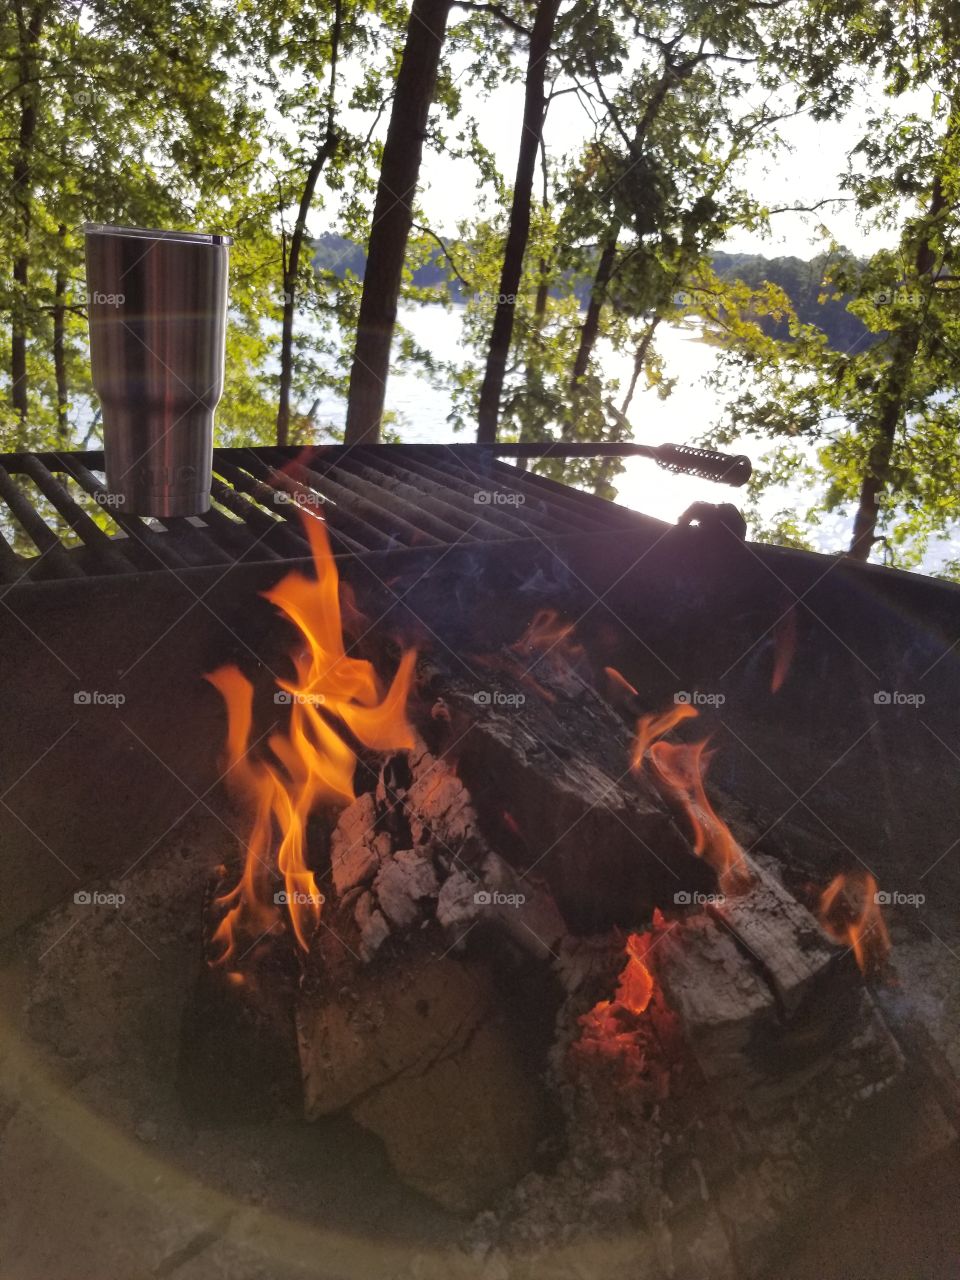 coffee and campfire on the lake.